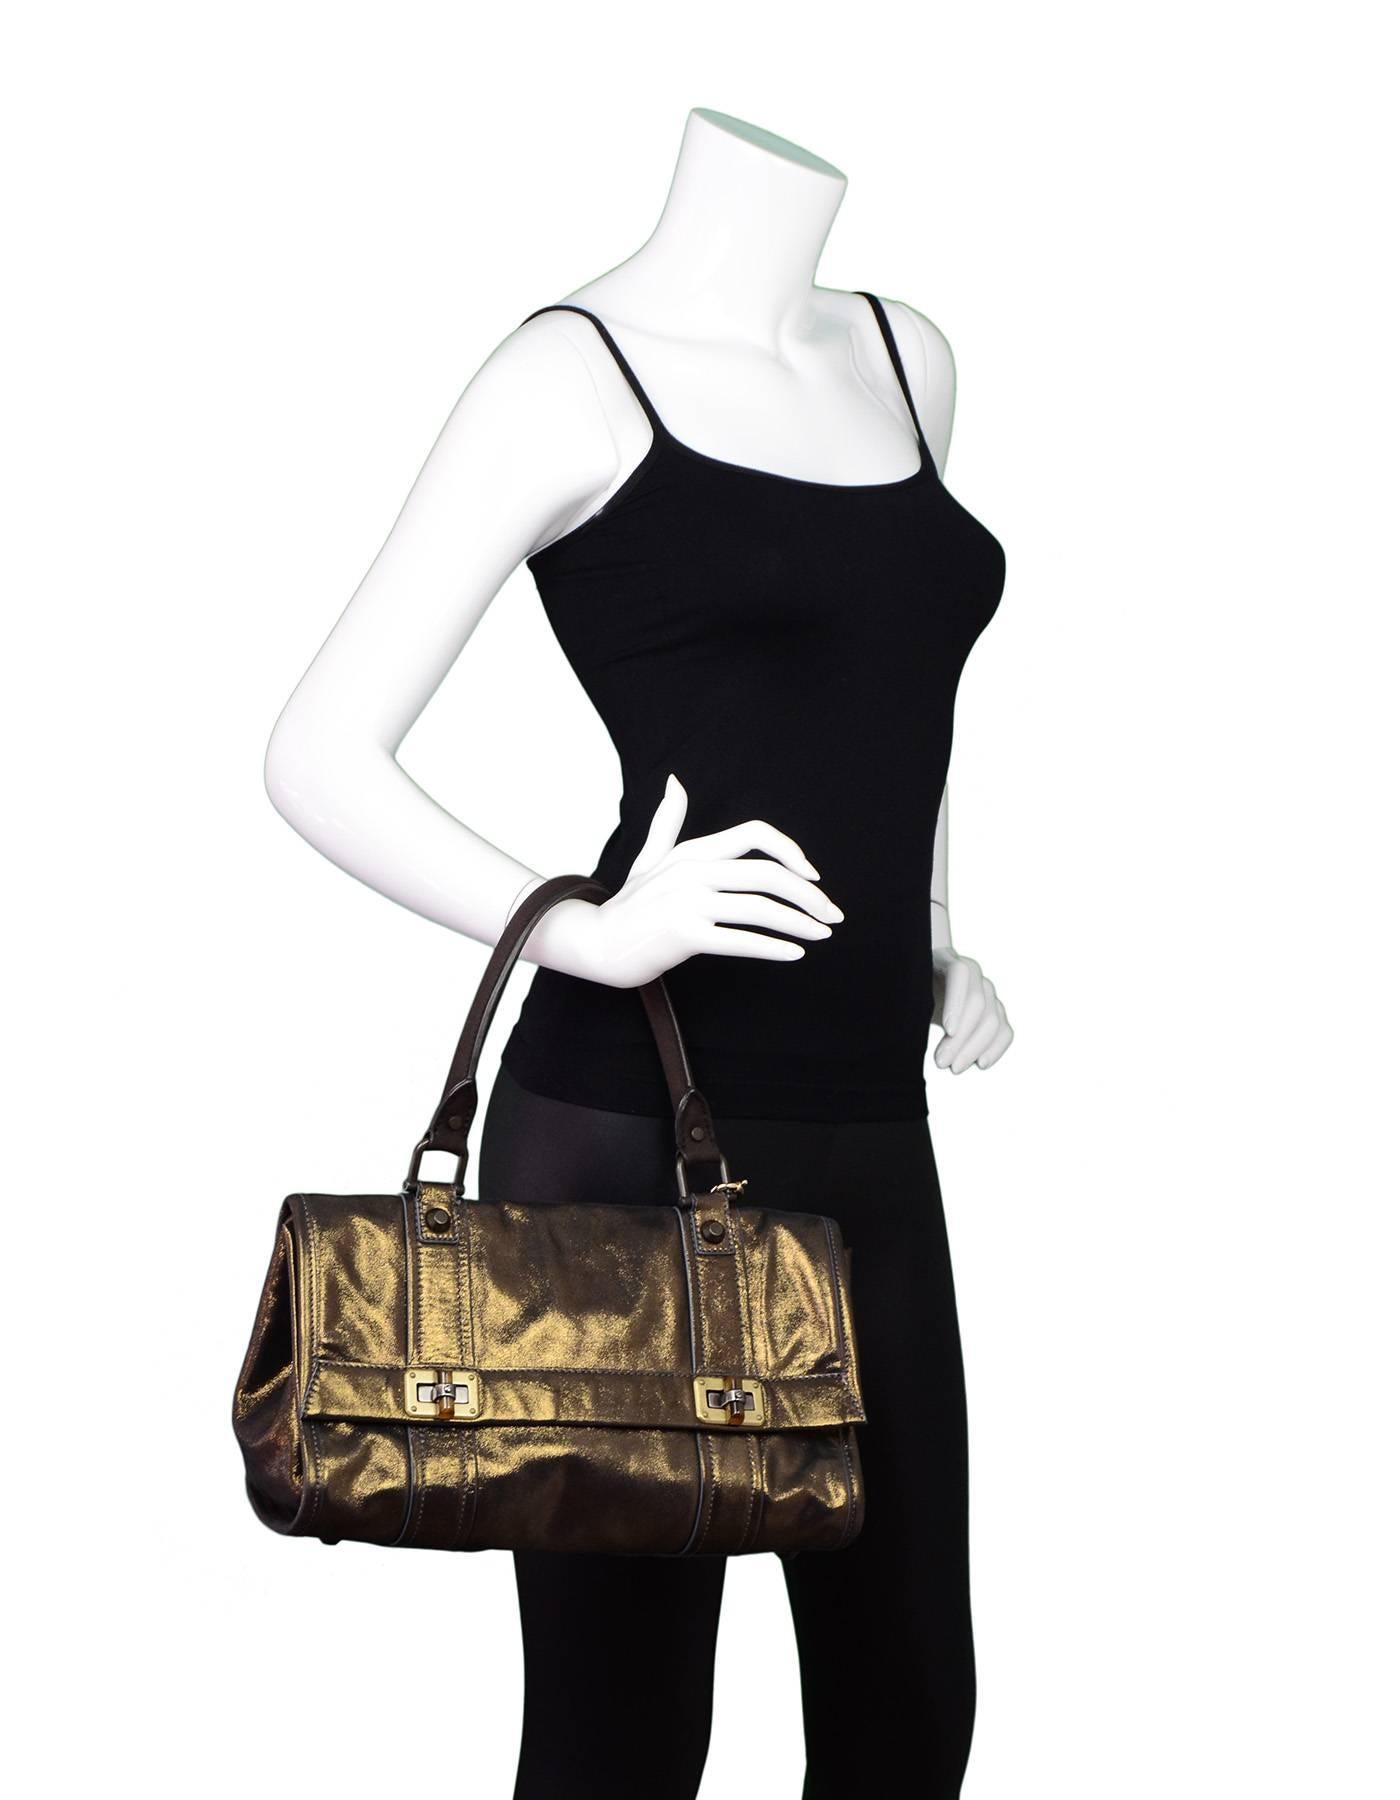 Lanvin Gold Iridescent Handle Bag

Made In: Italy
Color: Gold
Hardware: Brass
Materials: Leather, metal
Lining: Black canvas
Closure/Opening: Flap top with twist lock at each side
Exterior Pockets: None
Interior Pockets: One zip wall pocket
Overall